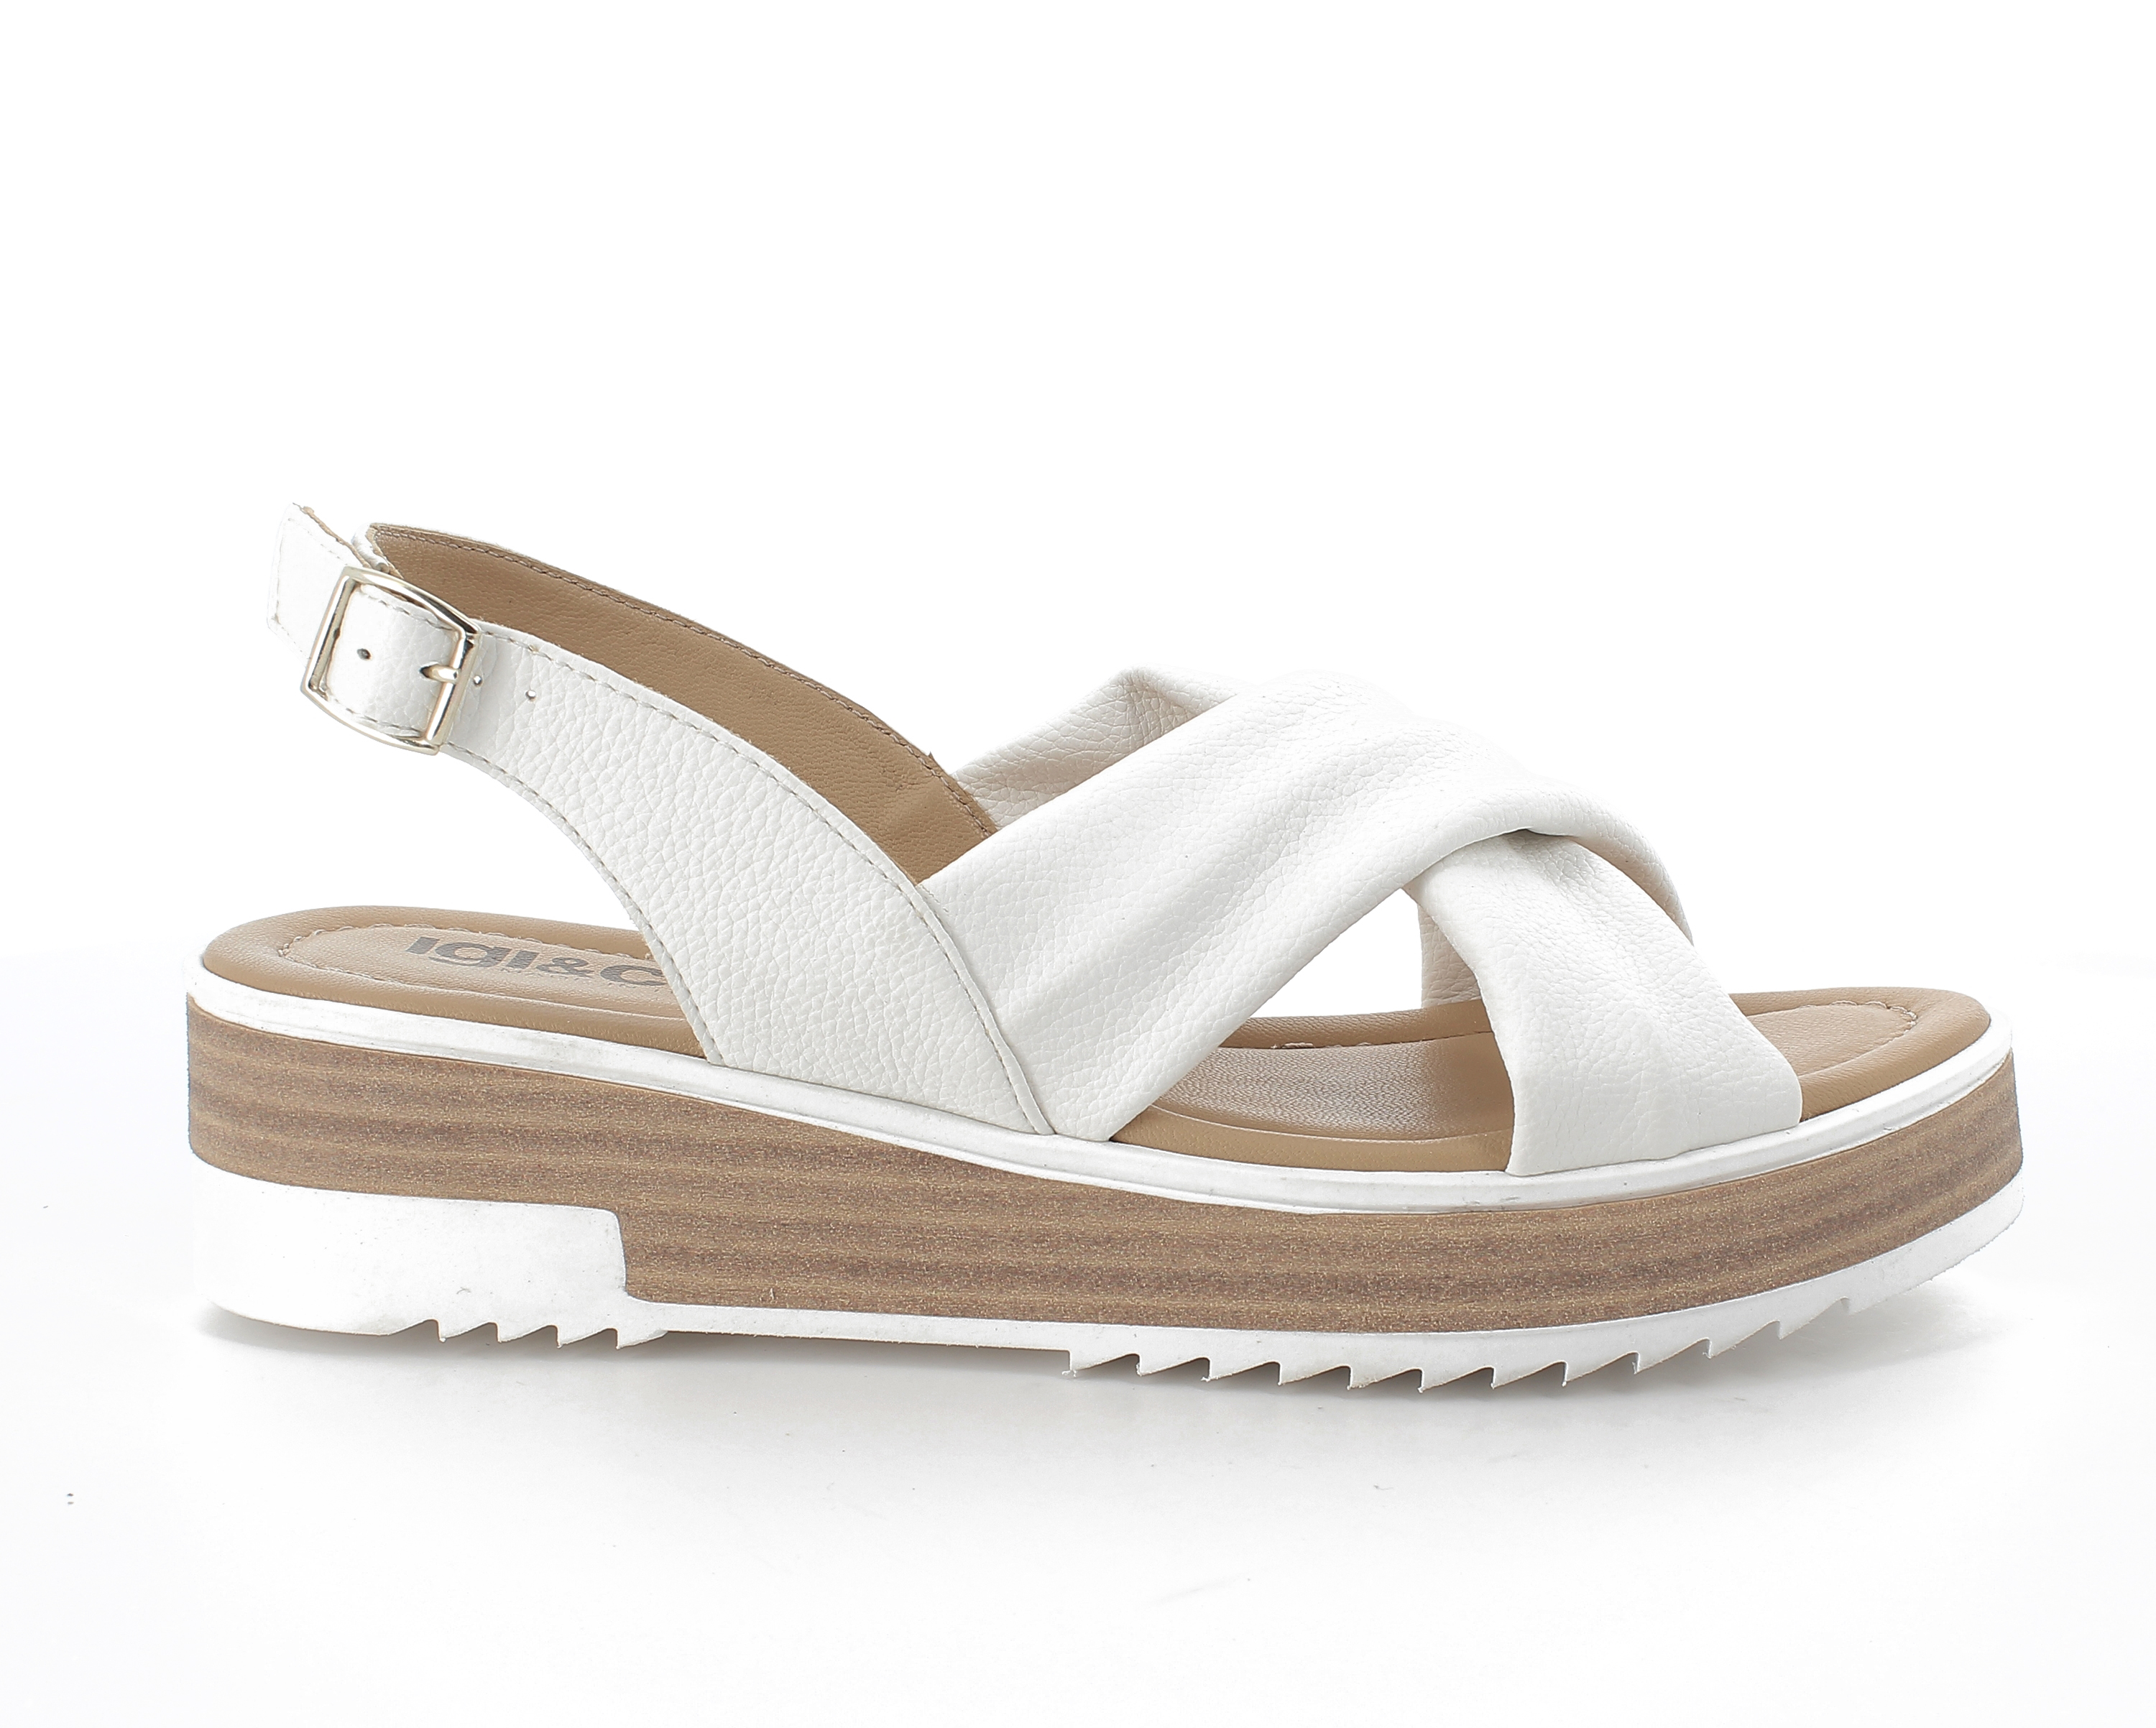 Dpy 71771 - White Leather